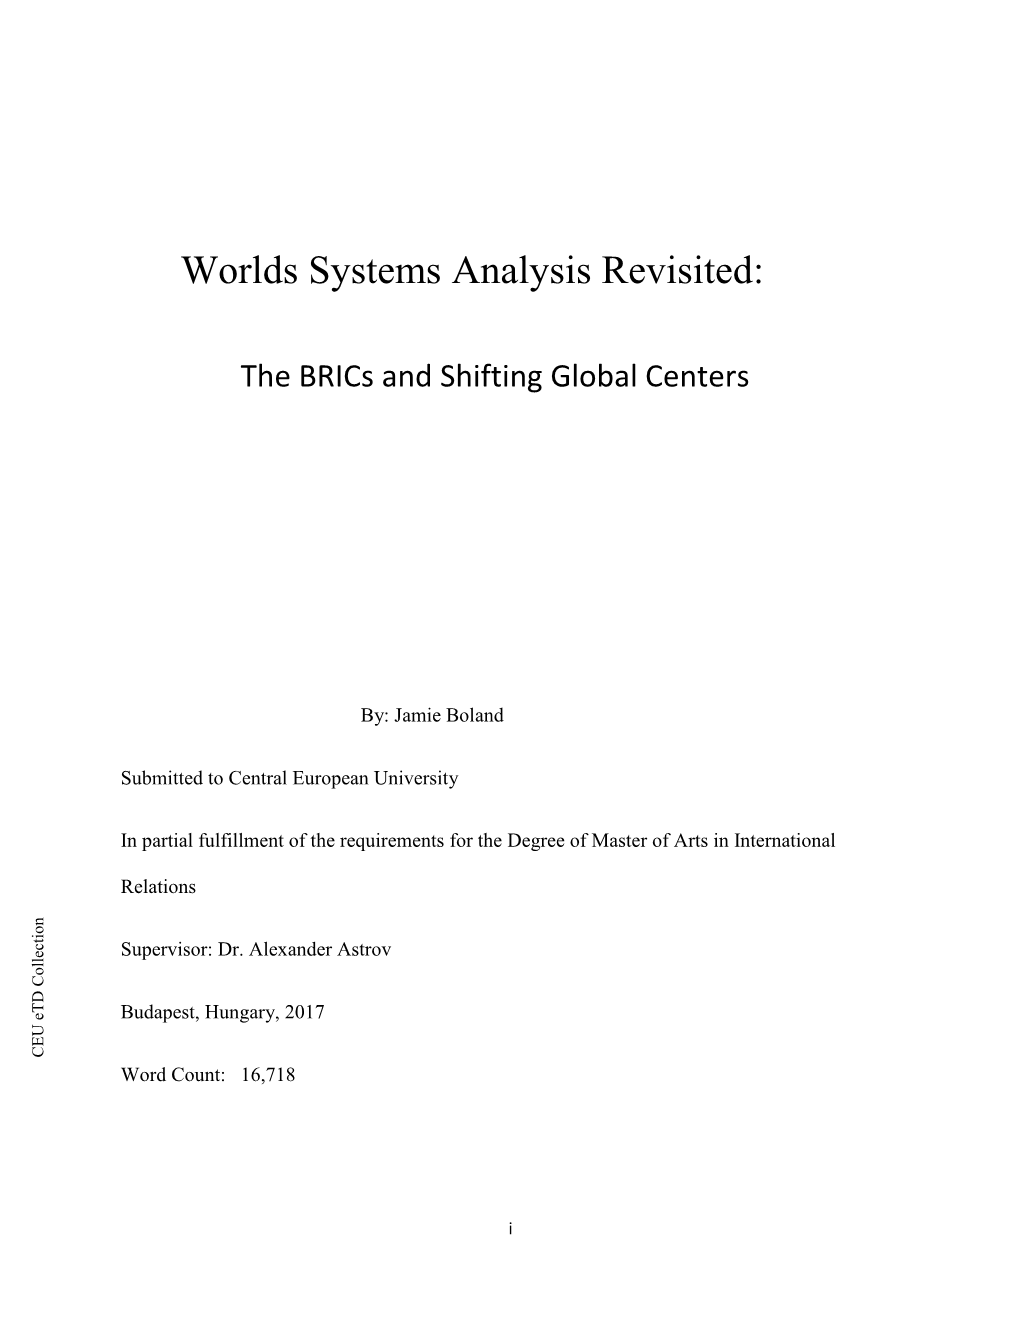 Worlds Systems Analysis Revisited